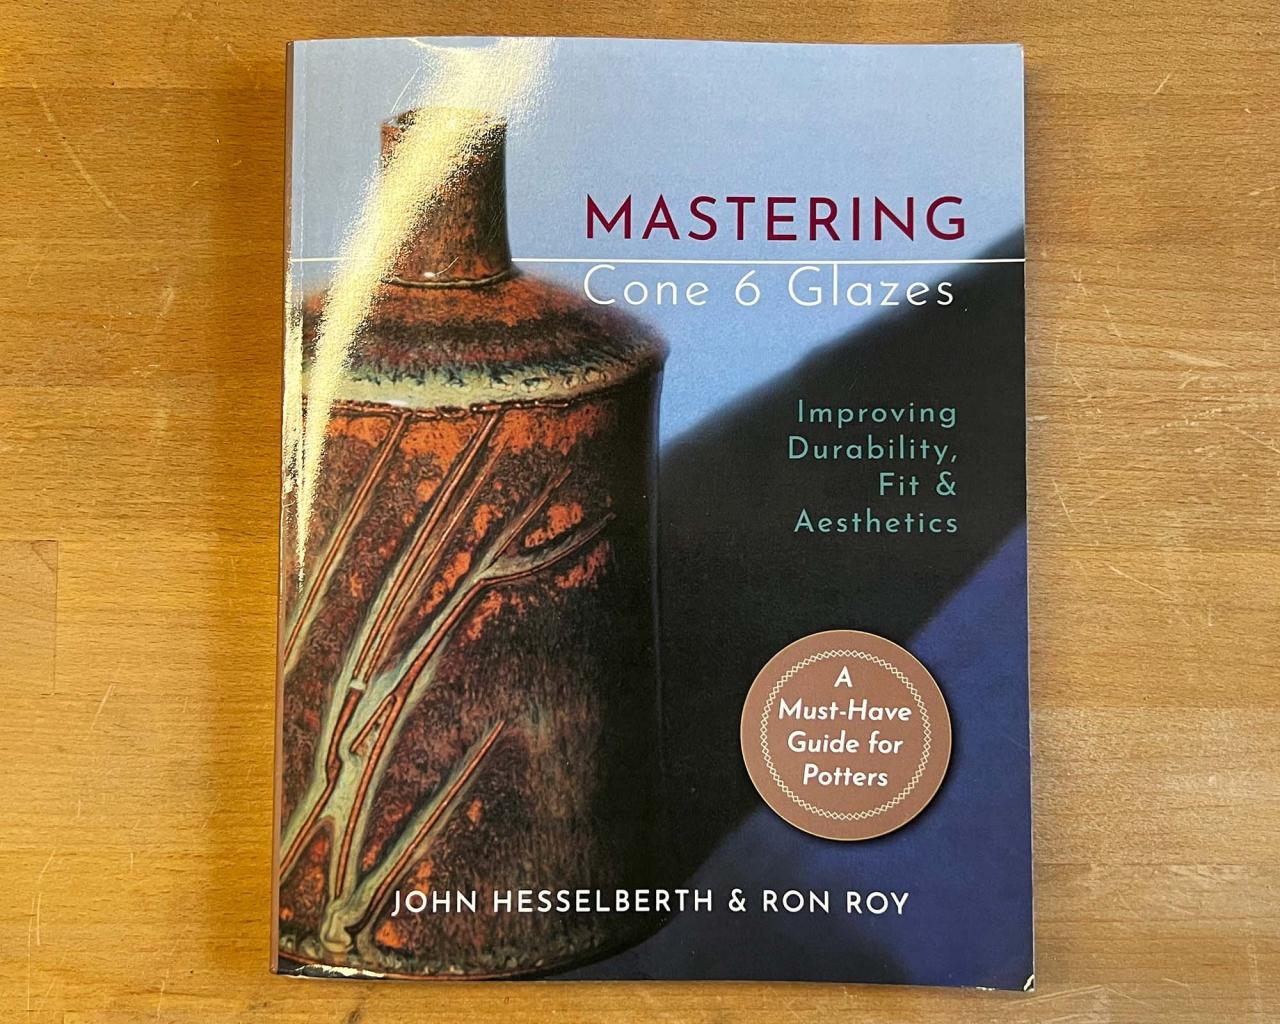 Mastering Cone 6 Glazes Book Review — The Studio Manager